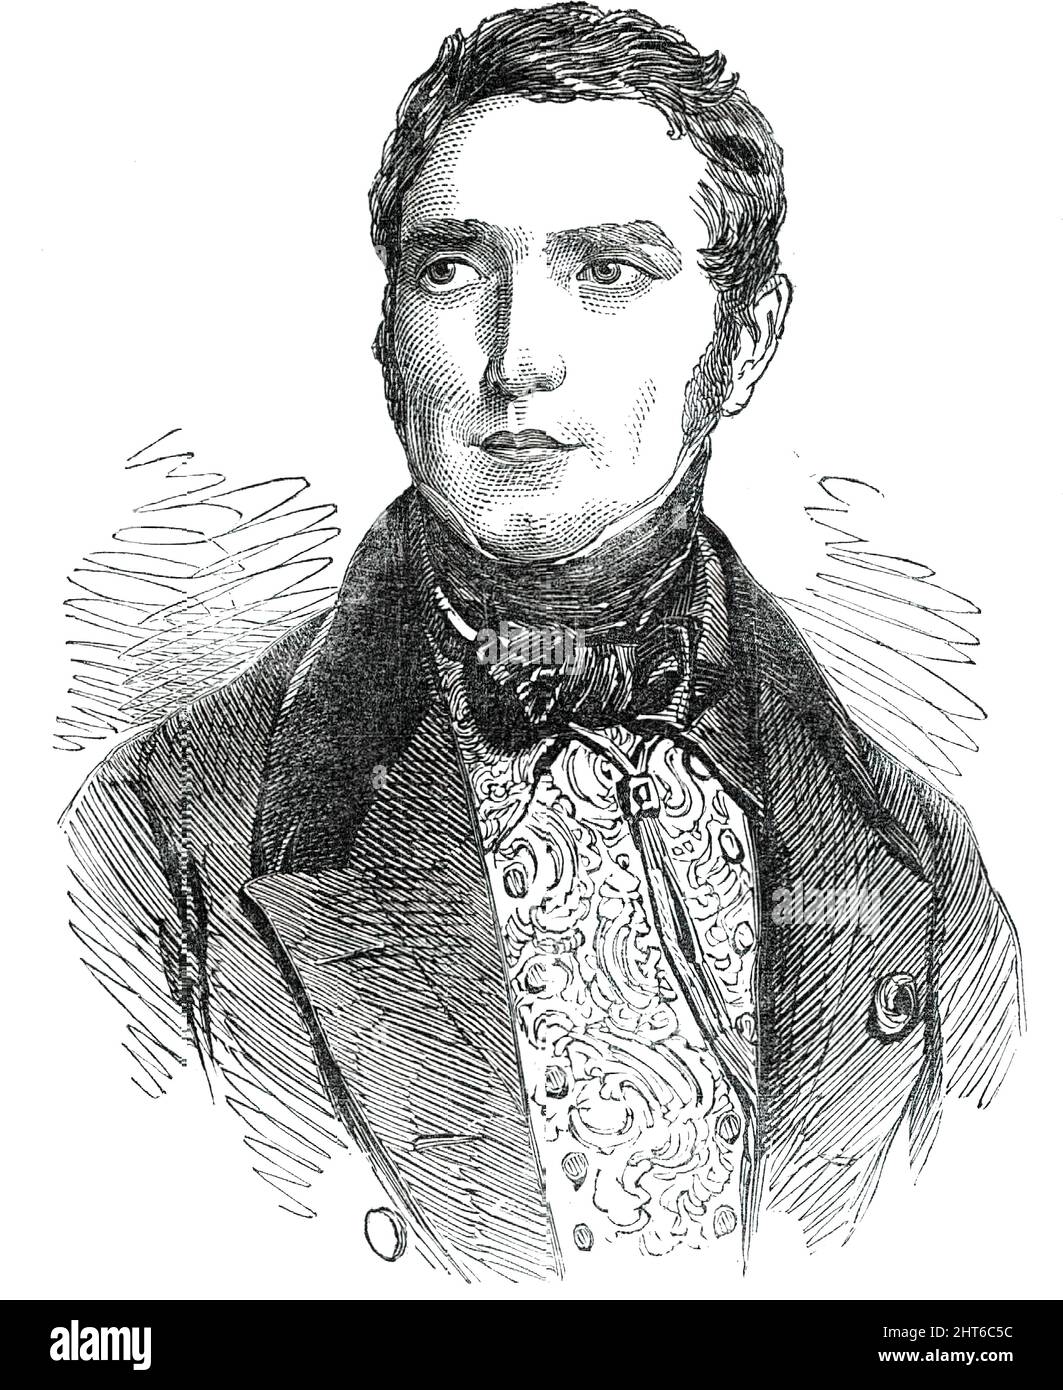 M. Scribe, 1850. Portrait of French playwright and librettist Eug&#xe8;ne Scribe. 'One of the essential differences betwixt Shakspeare's and Scribe's plot is, that the English &quot;Tempest&quot; (except in a passing description) is without a tempest - a most important subject for a composer to treat'. From &quot;Illustrated London News&quot;, 1850. Stock Photo